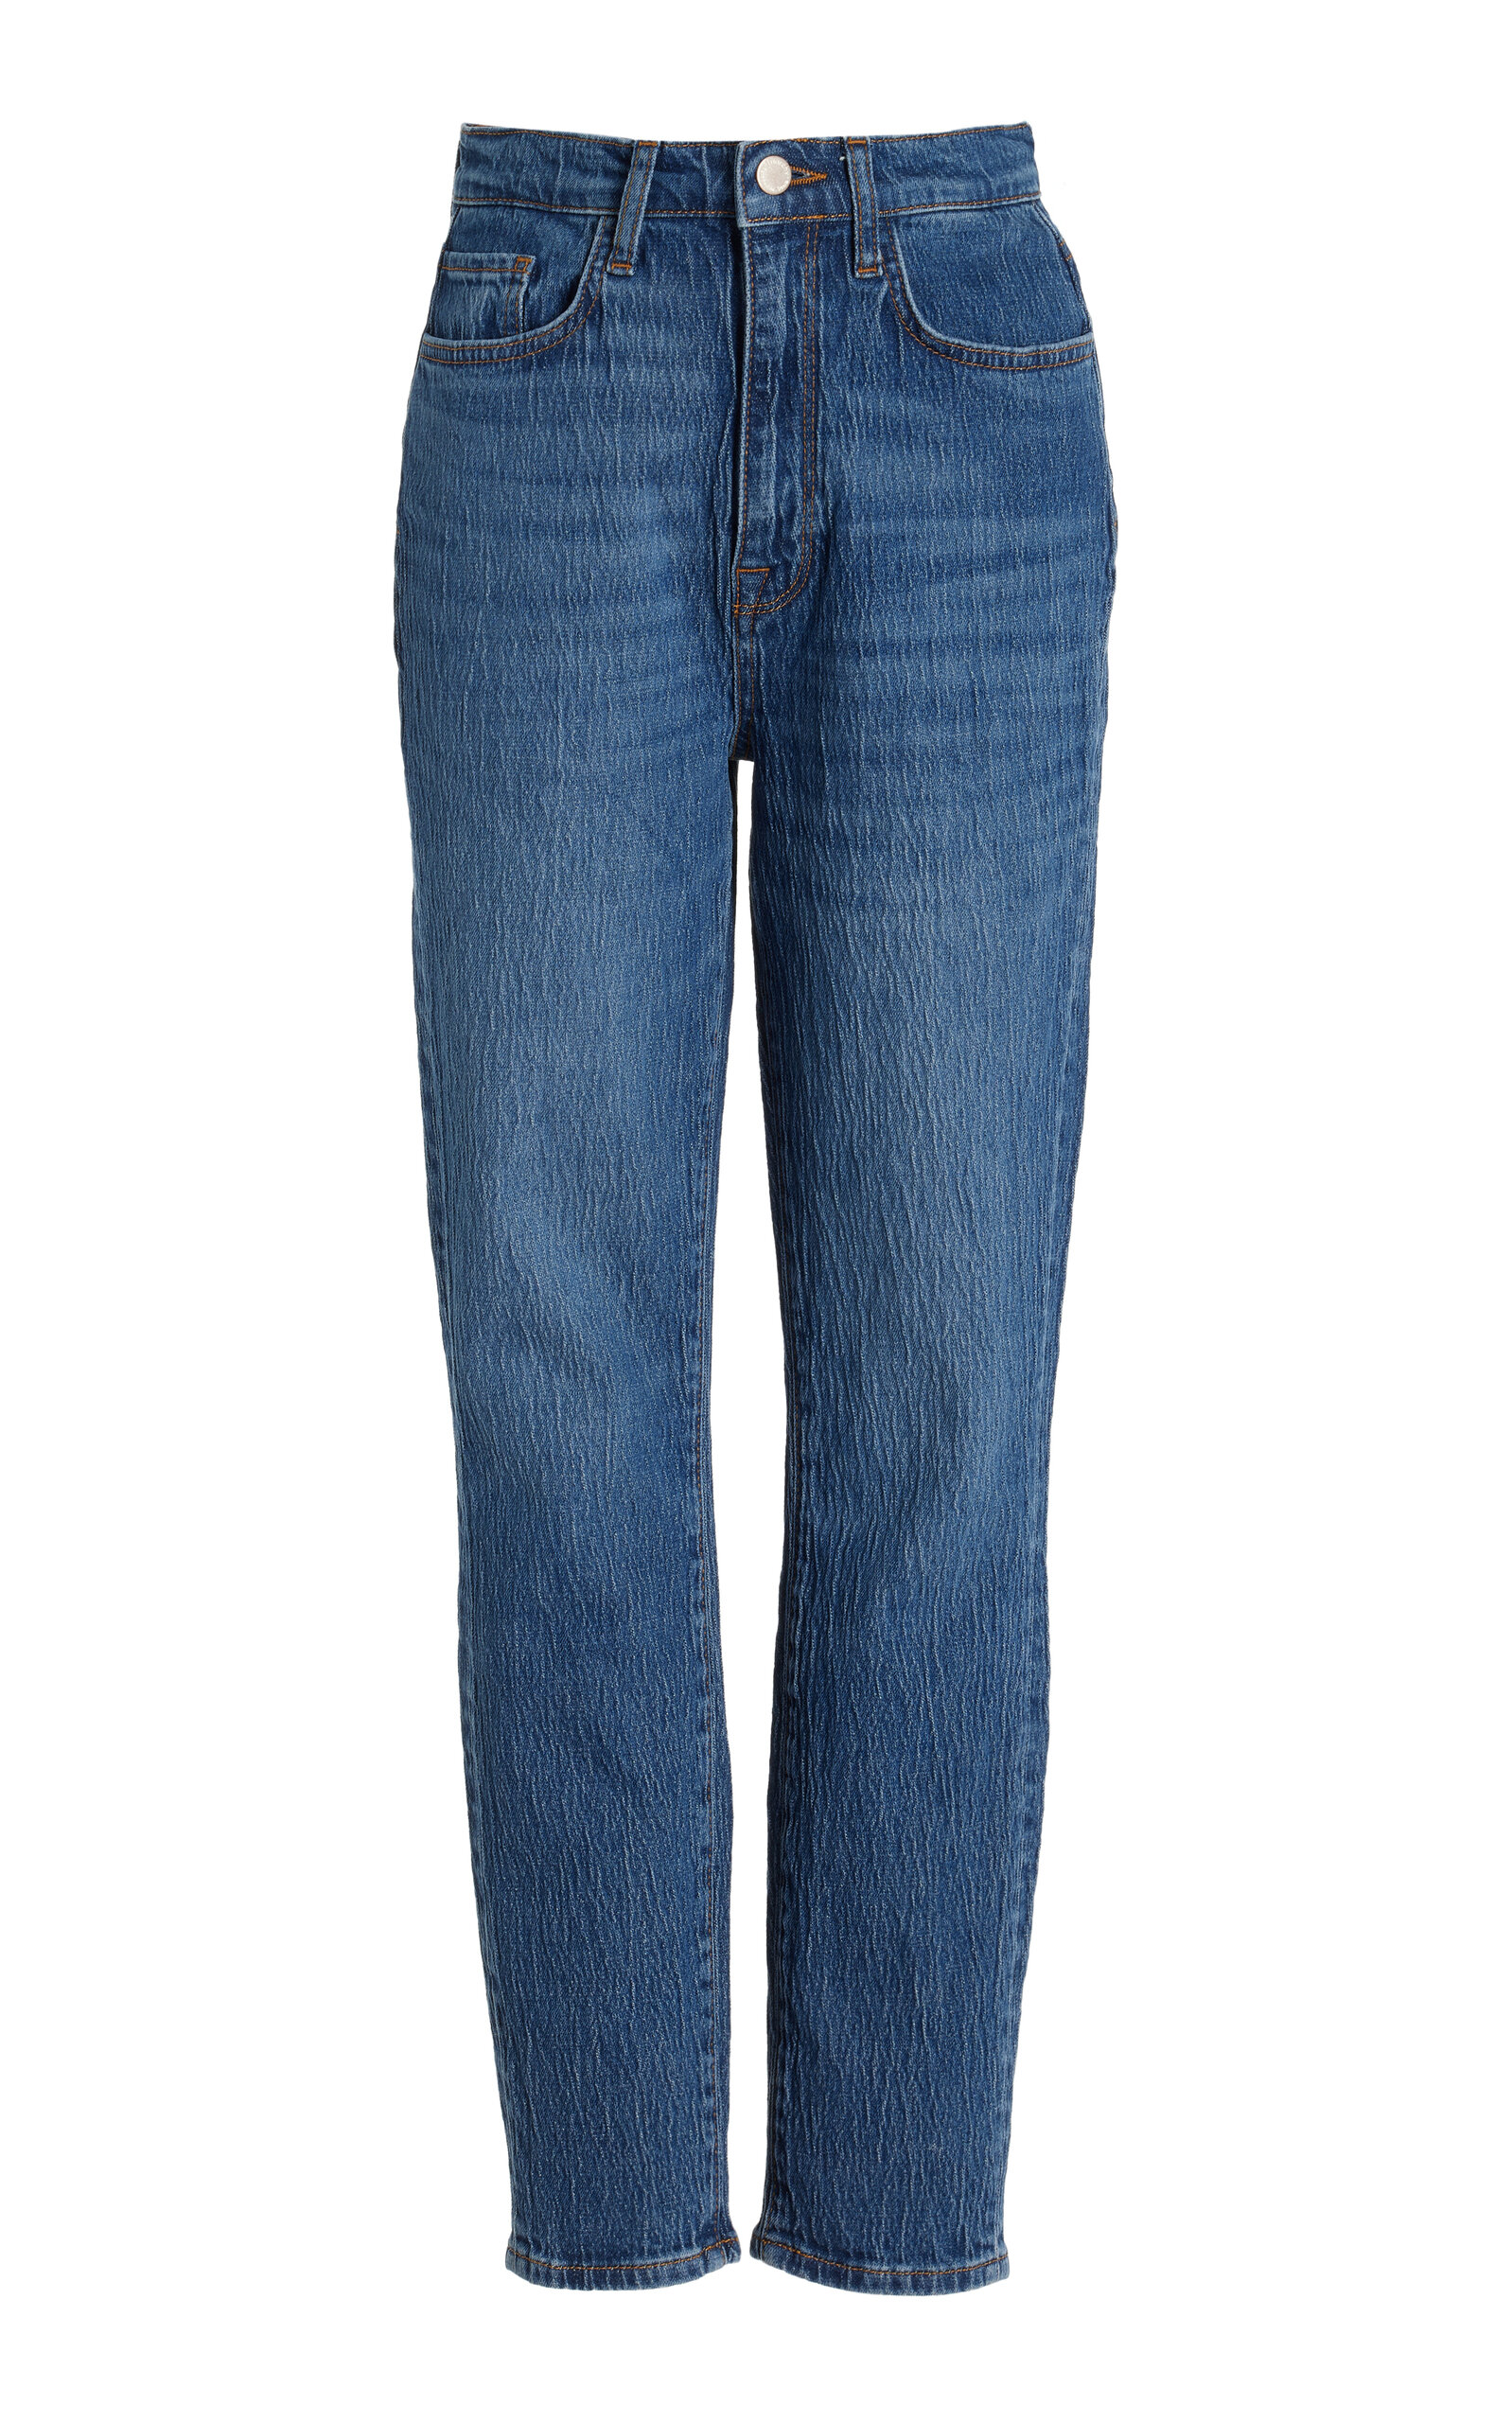 Ms. Ava Stretch High-Rise Skinny Jeans